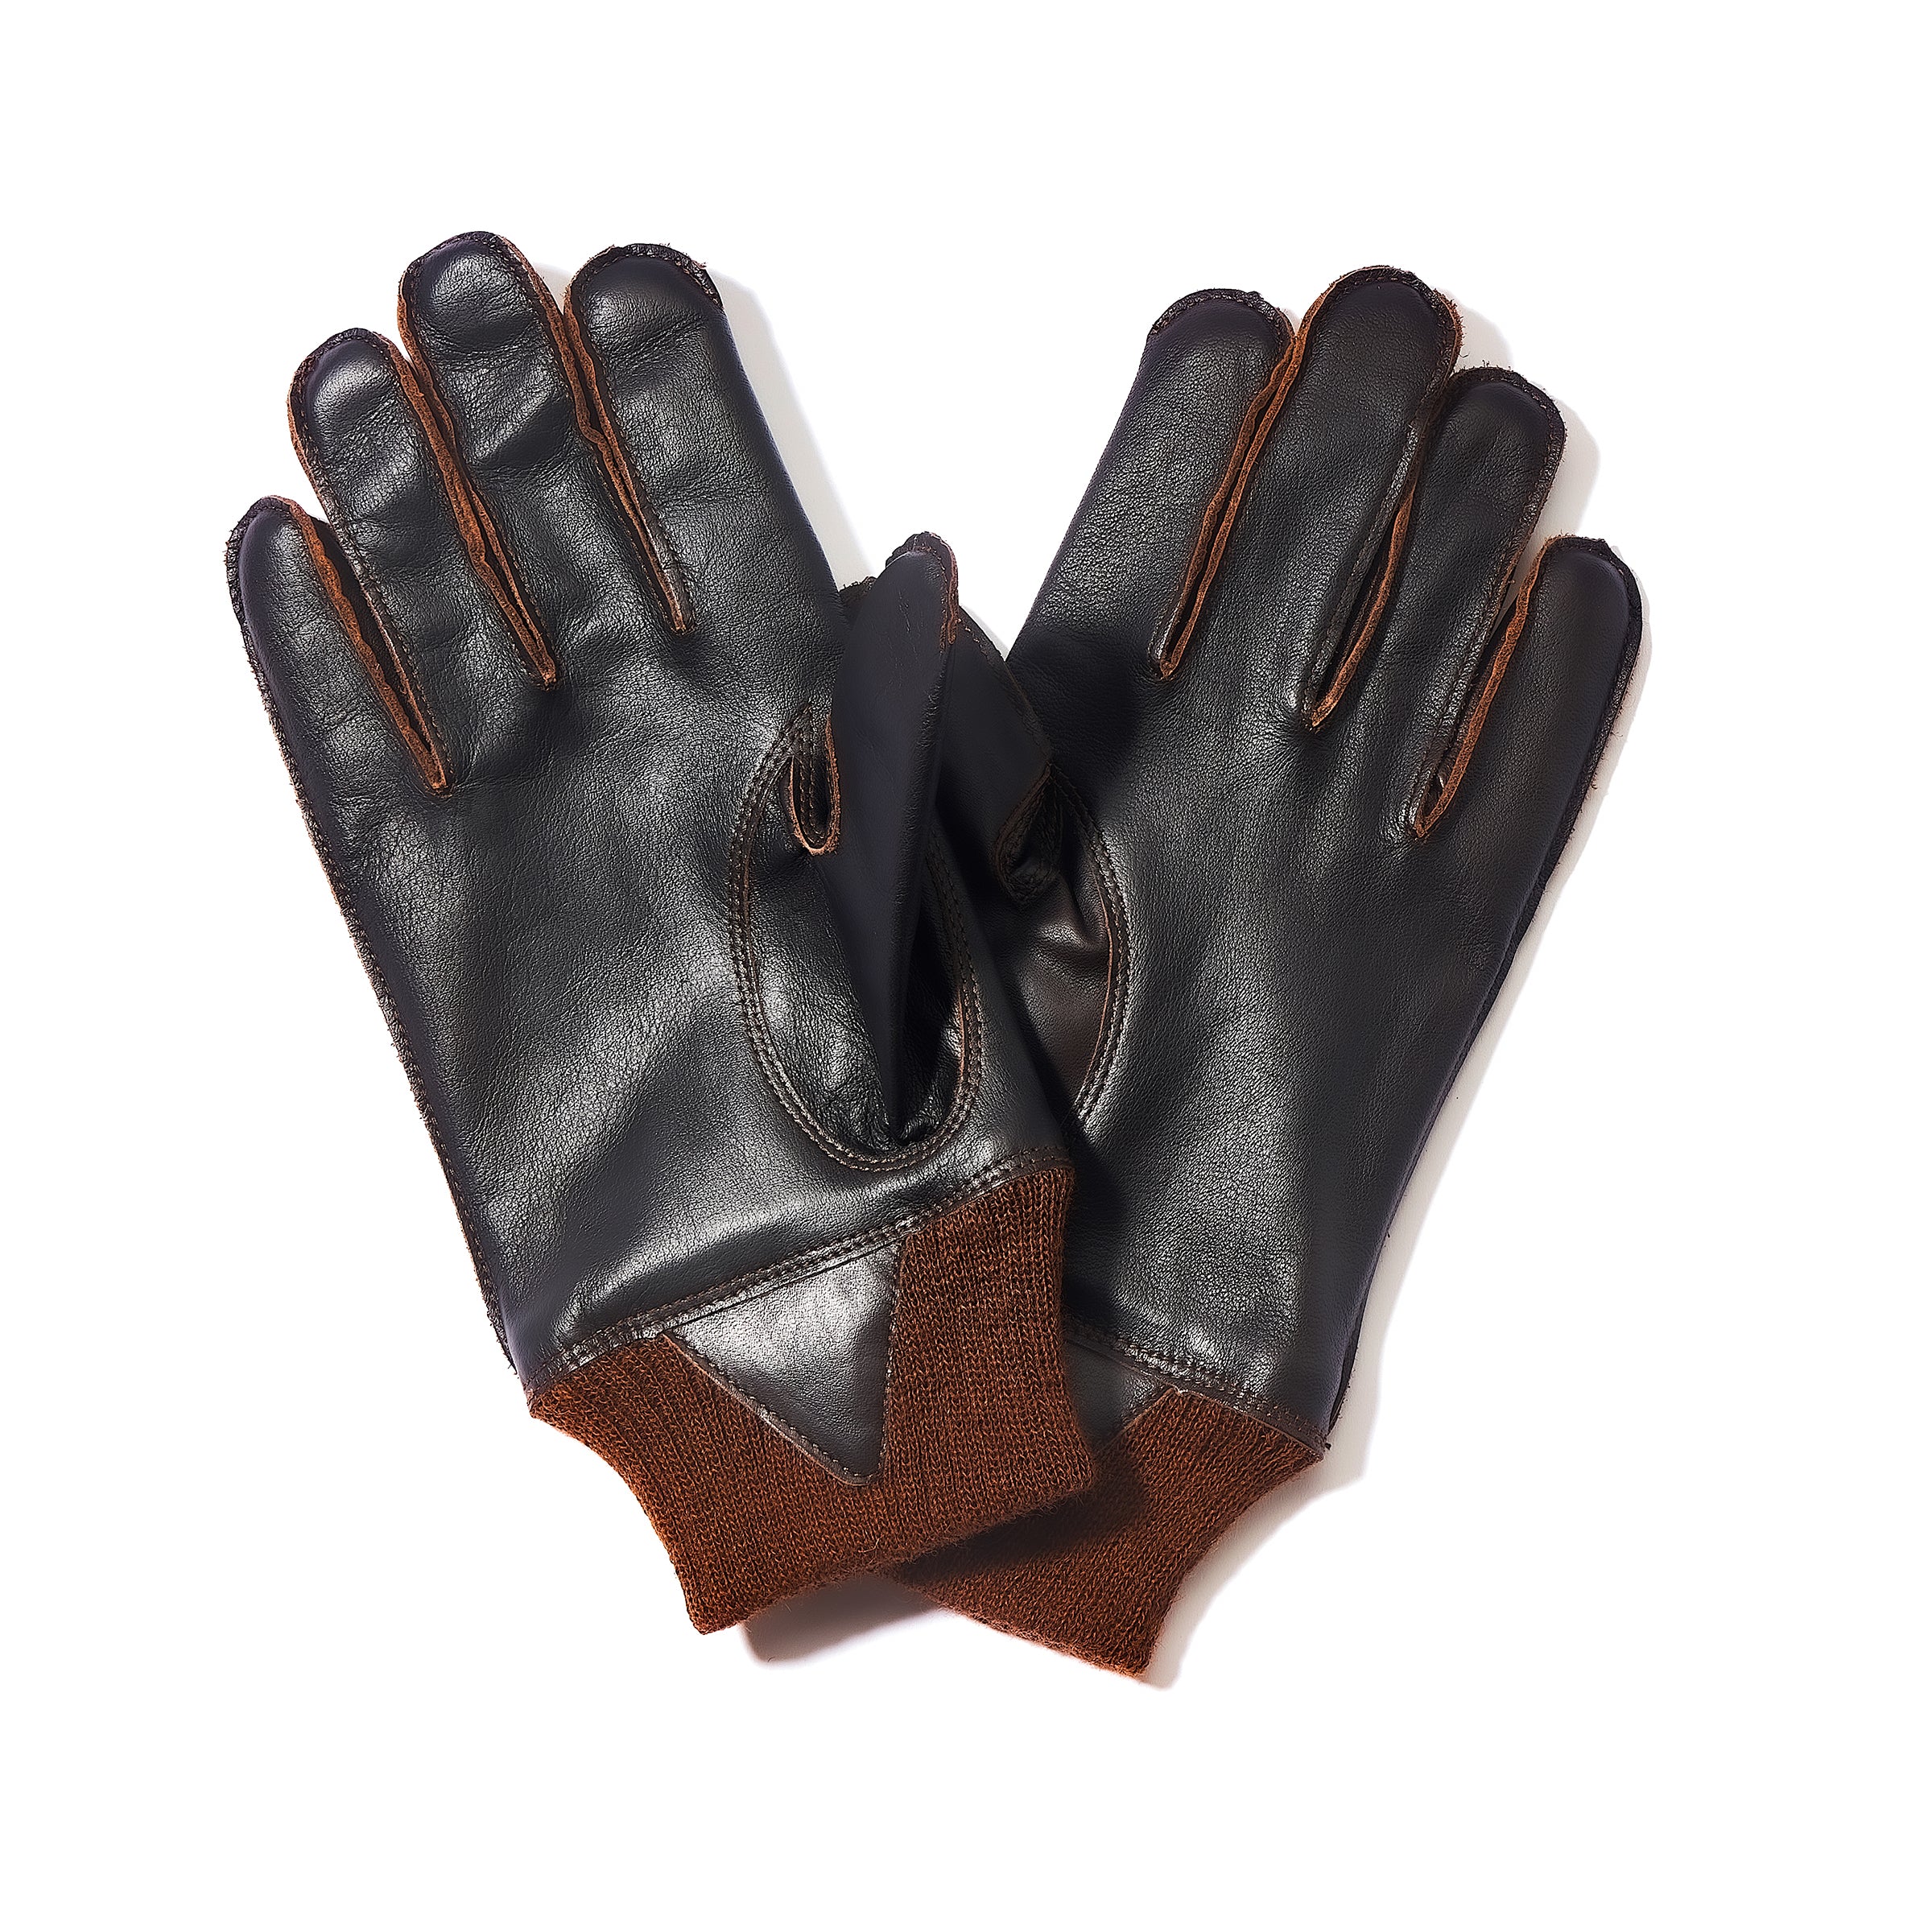 TYPE A-10 GLOVE, FLYING WINTER – The Real McCoy's